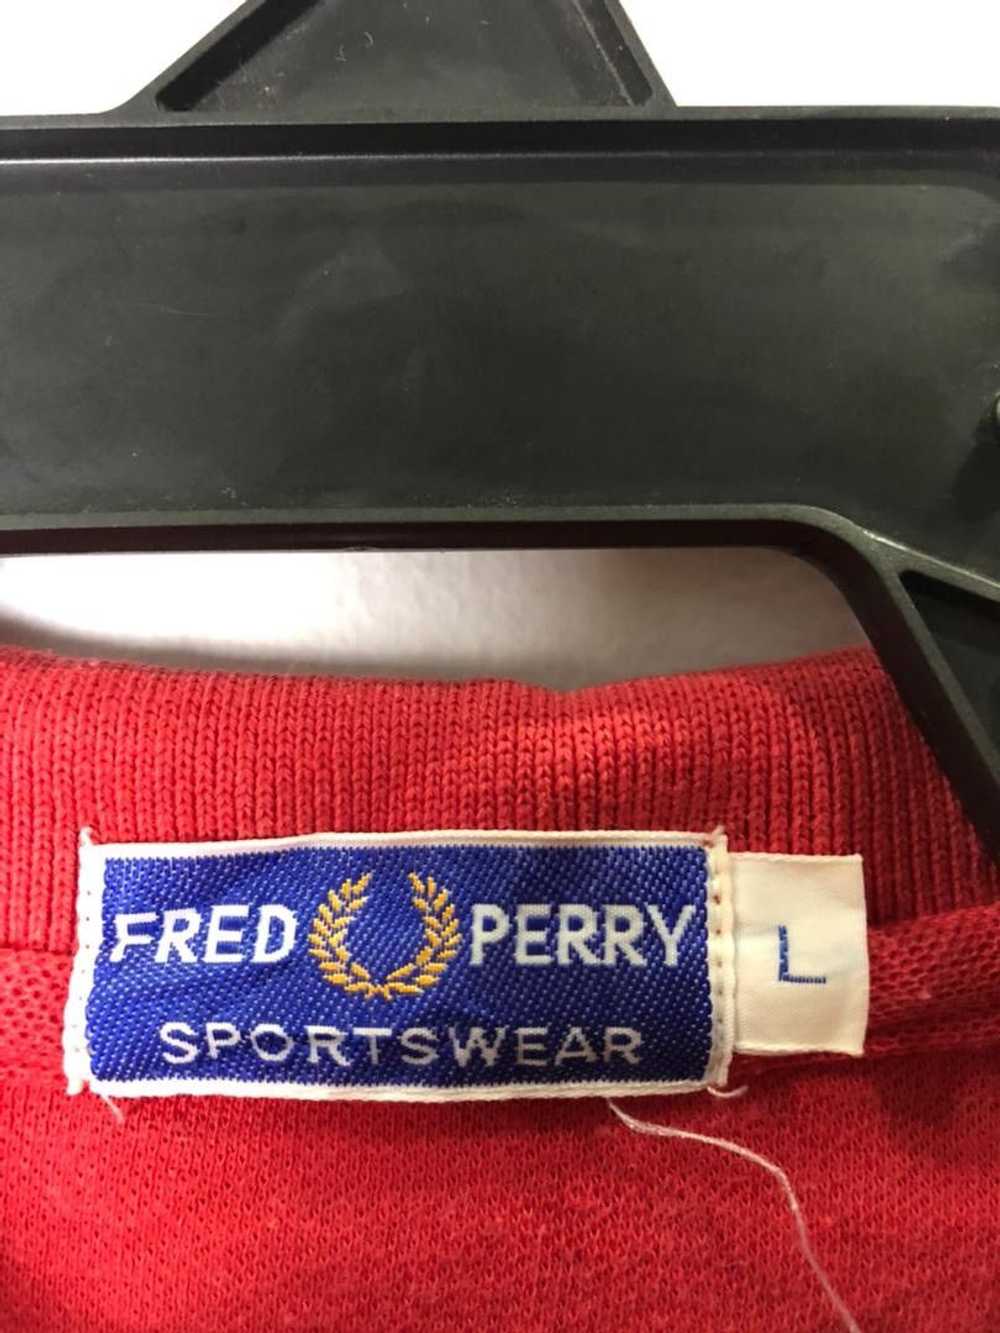 Fred Perry × Sportswear × Vintage Vintage Fred Pe… - image 5